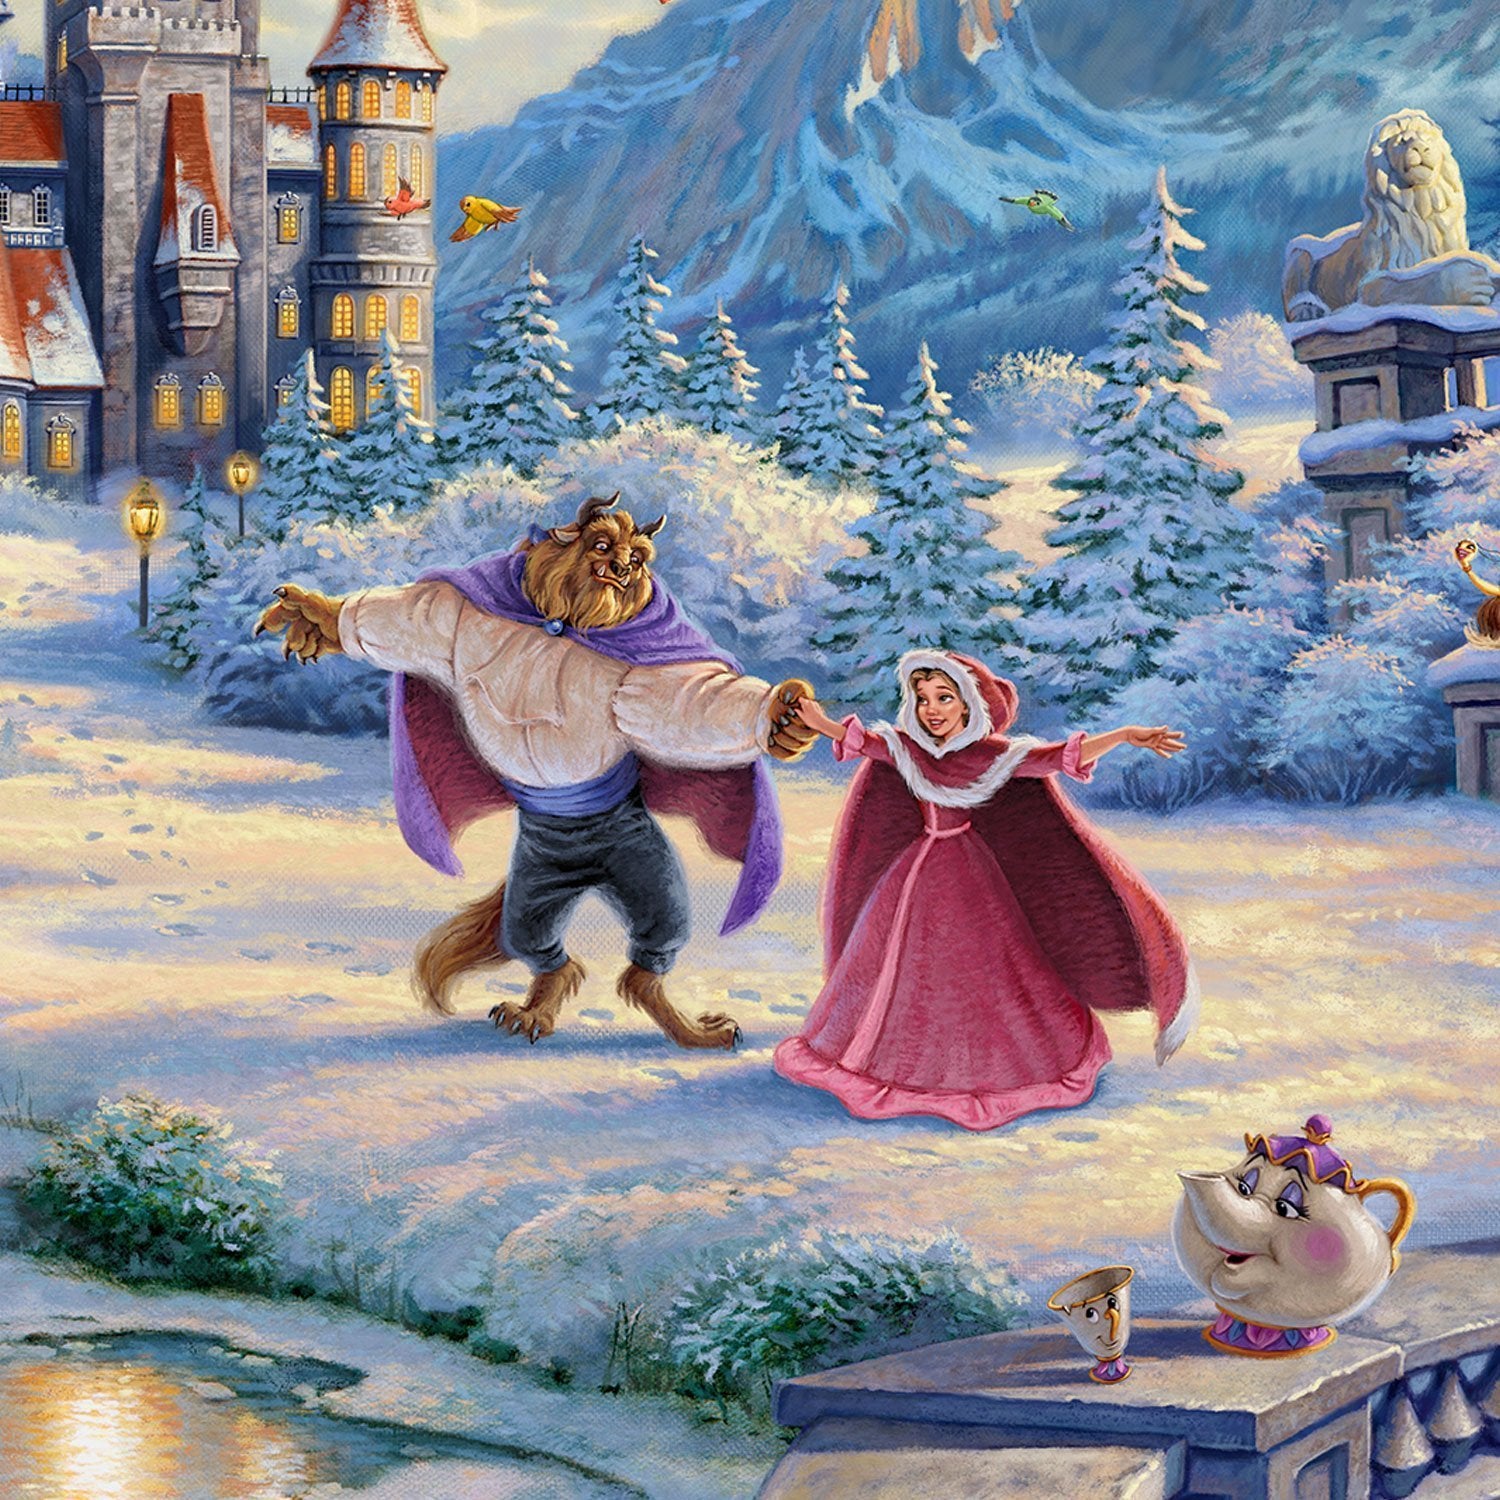  Beauty and the Beast's Winter Enchantment - Closeup 2